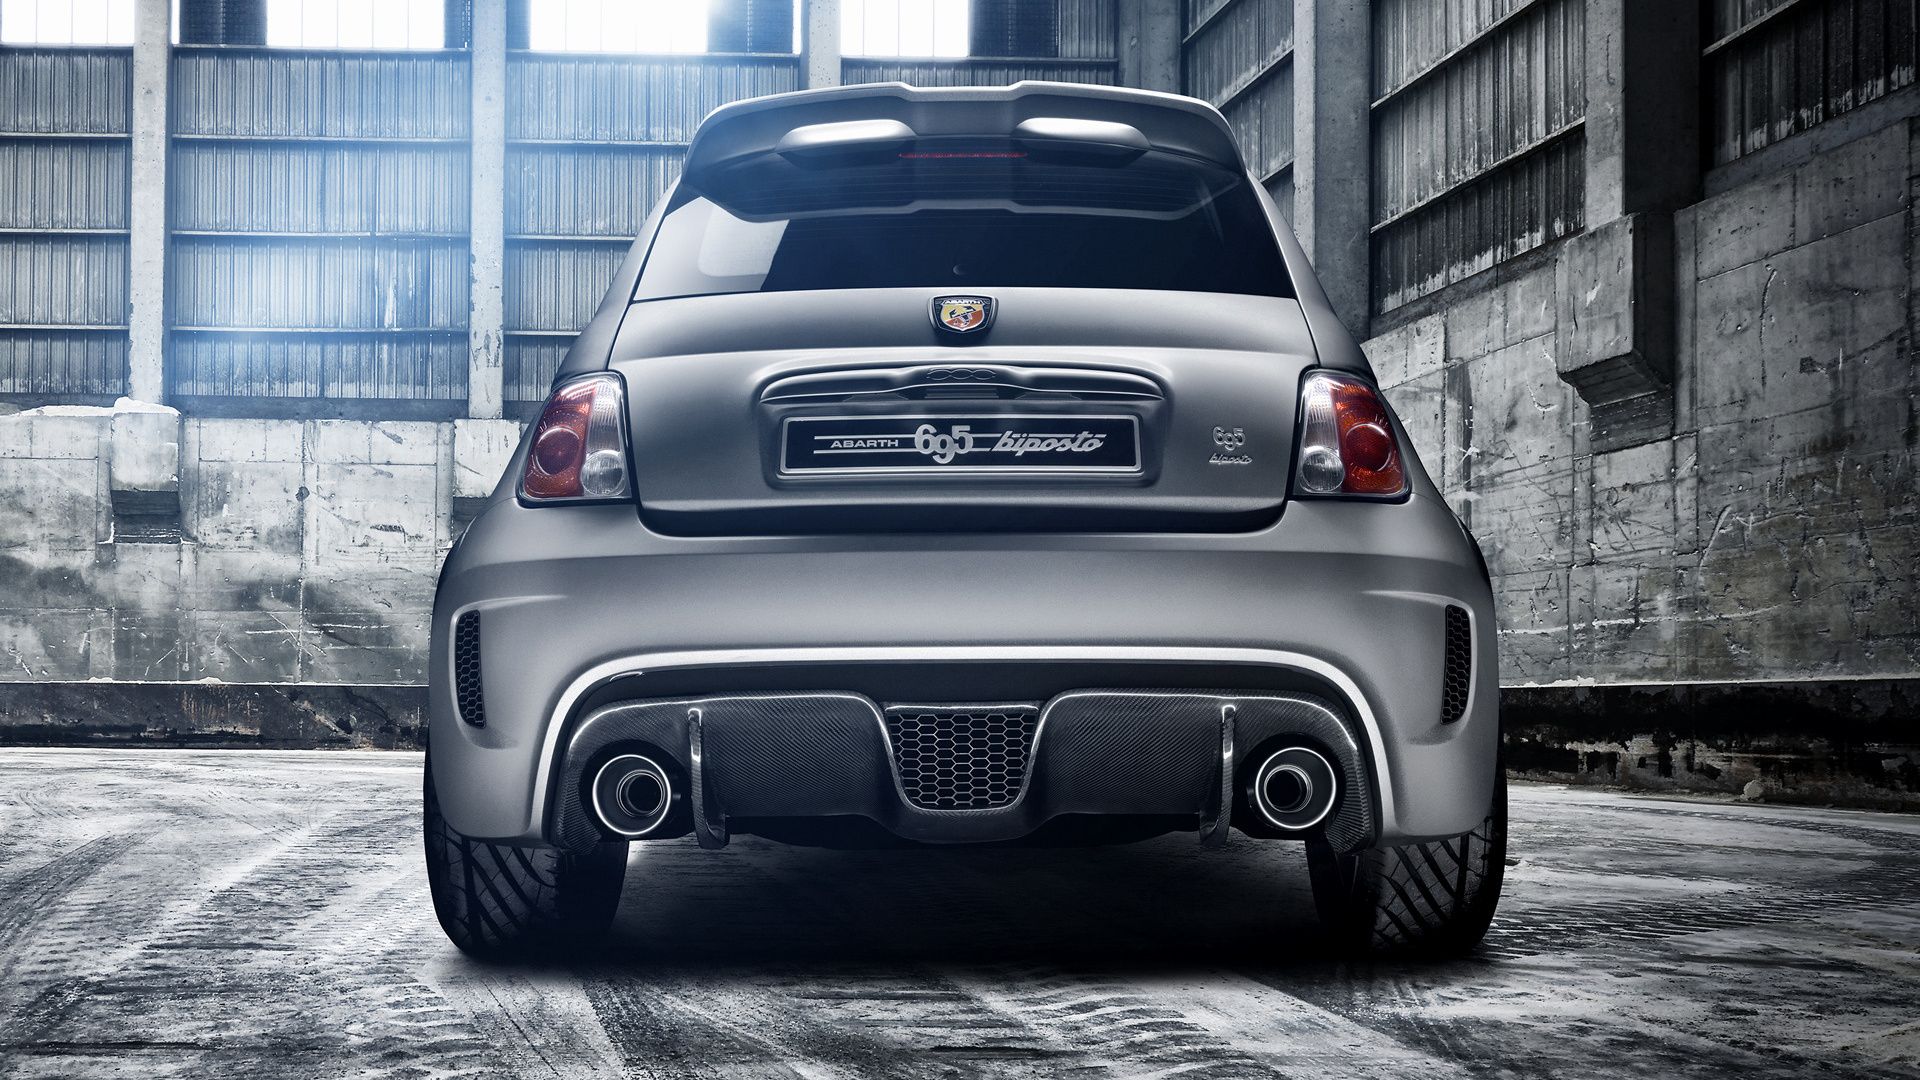 Abarth 595 Wallpapers